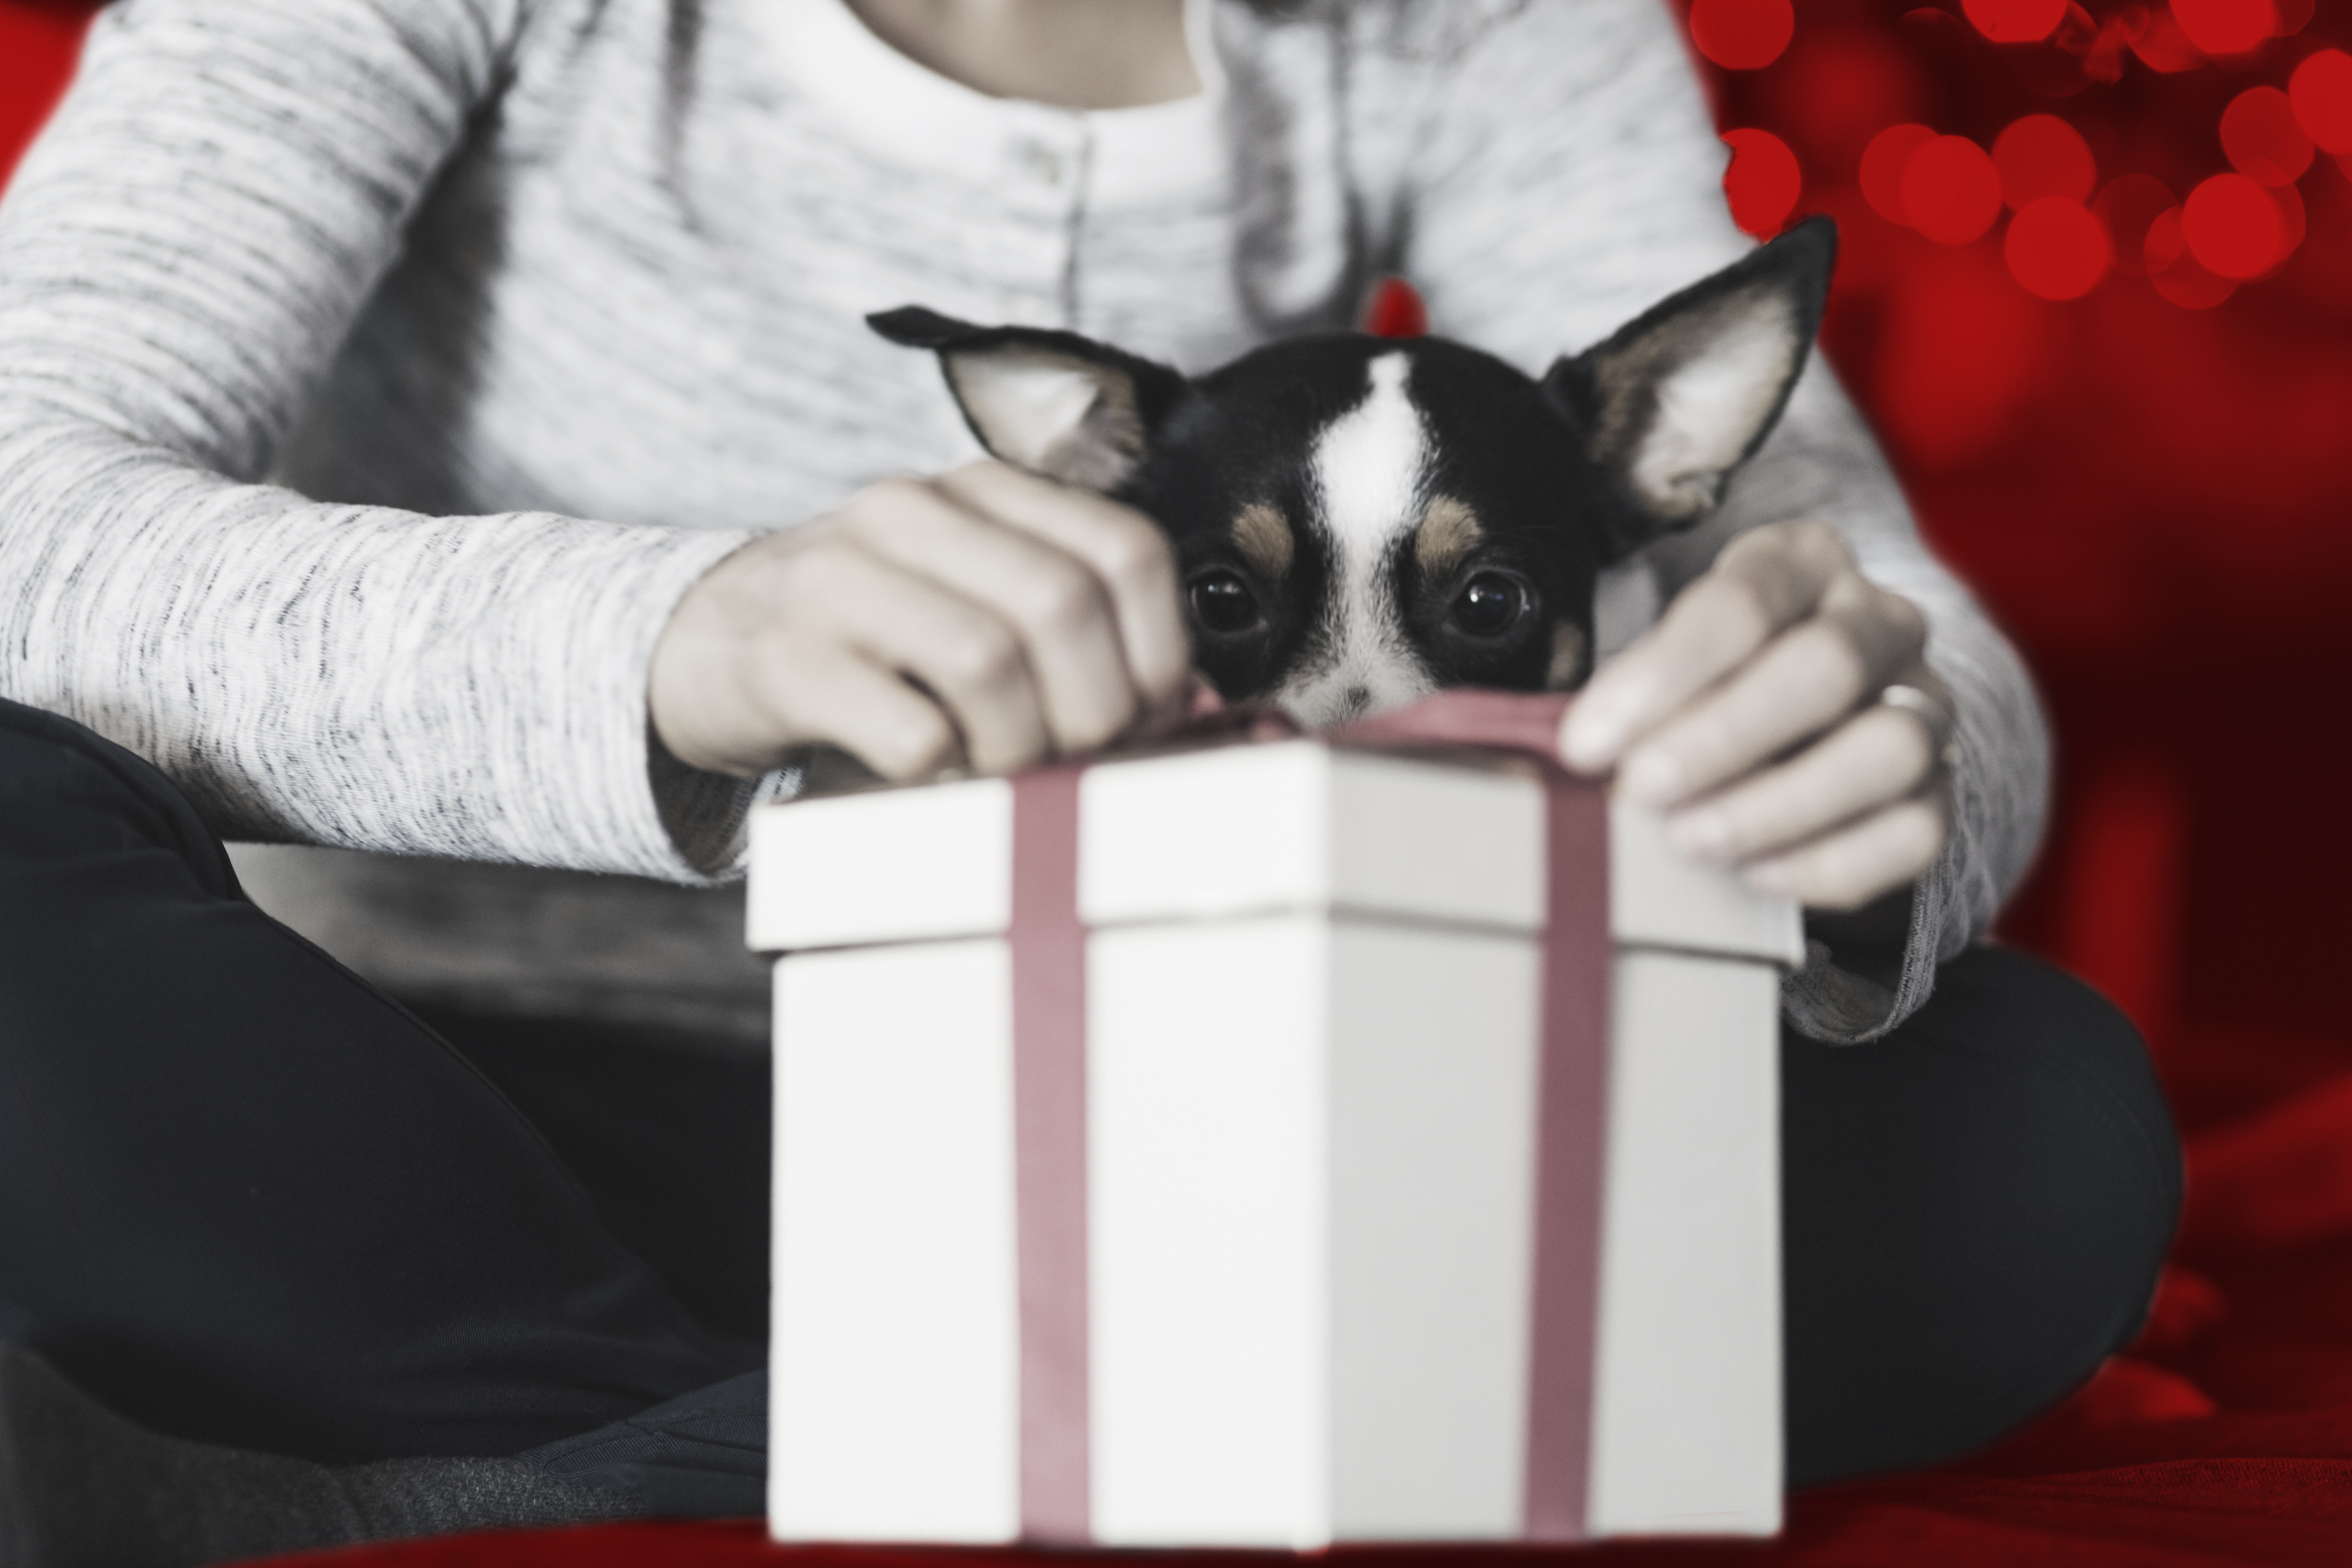 Pet Spending by Generation: Millennials Are Most Likely to Spoil Pets With Lots of Holiday Gifts